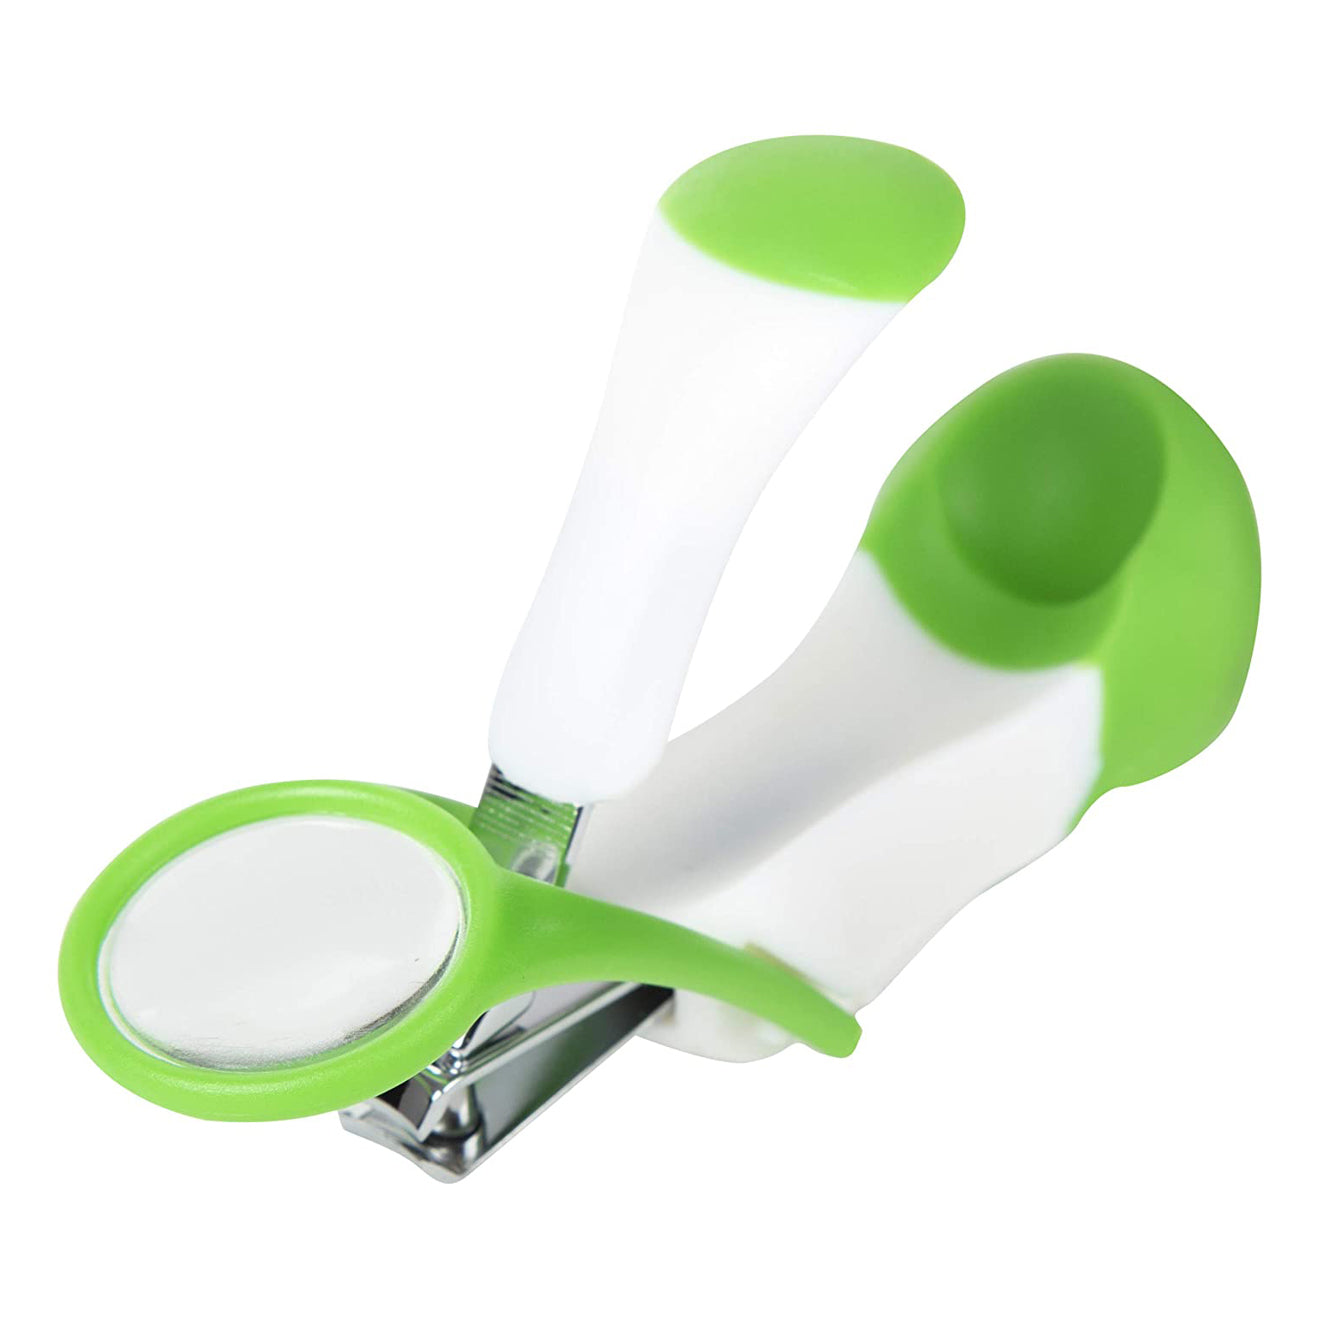 HOPOP Baby Nail Clipper With Magnifier - Green 0m+